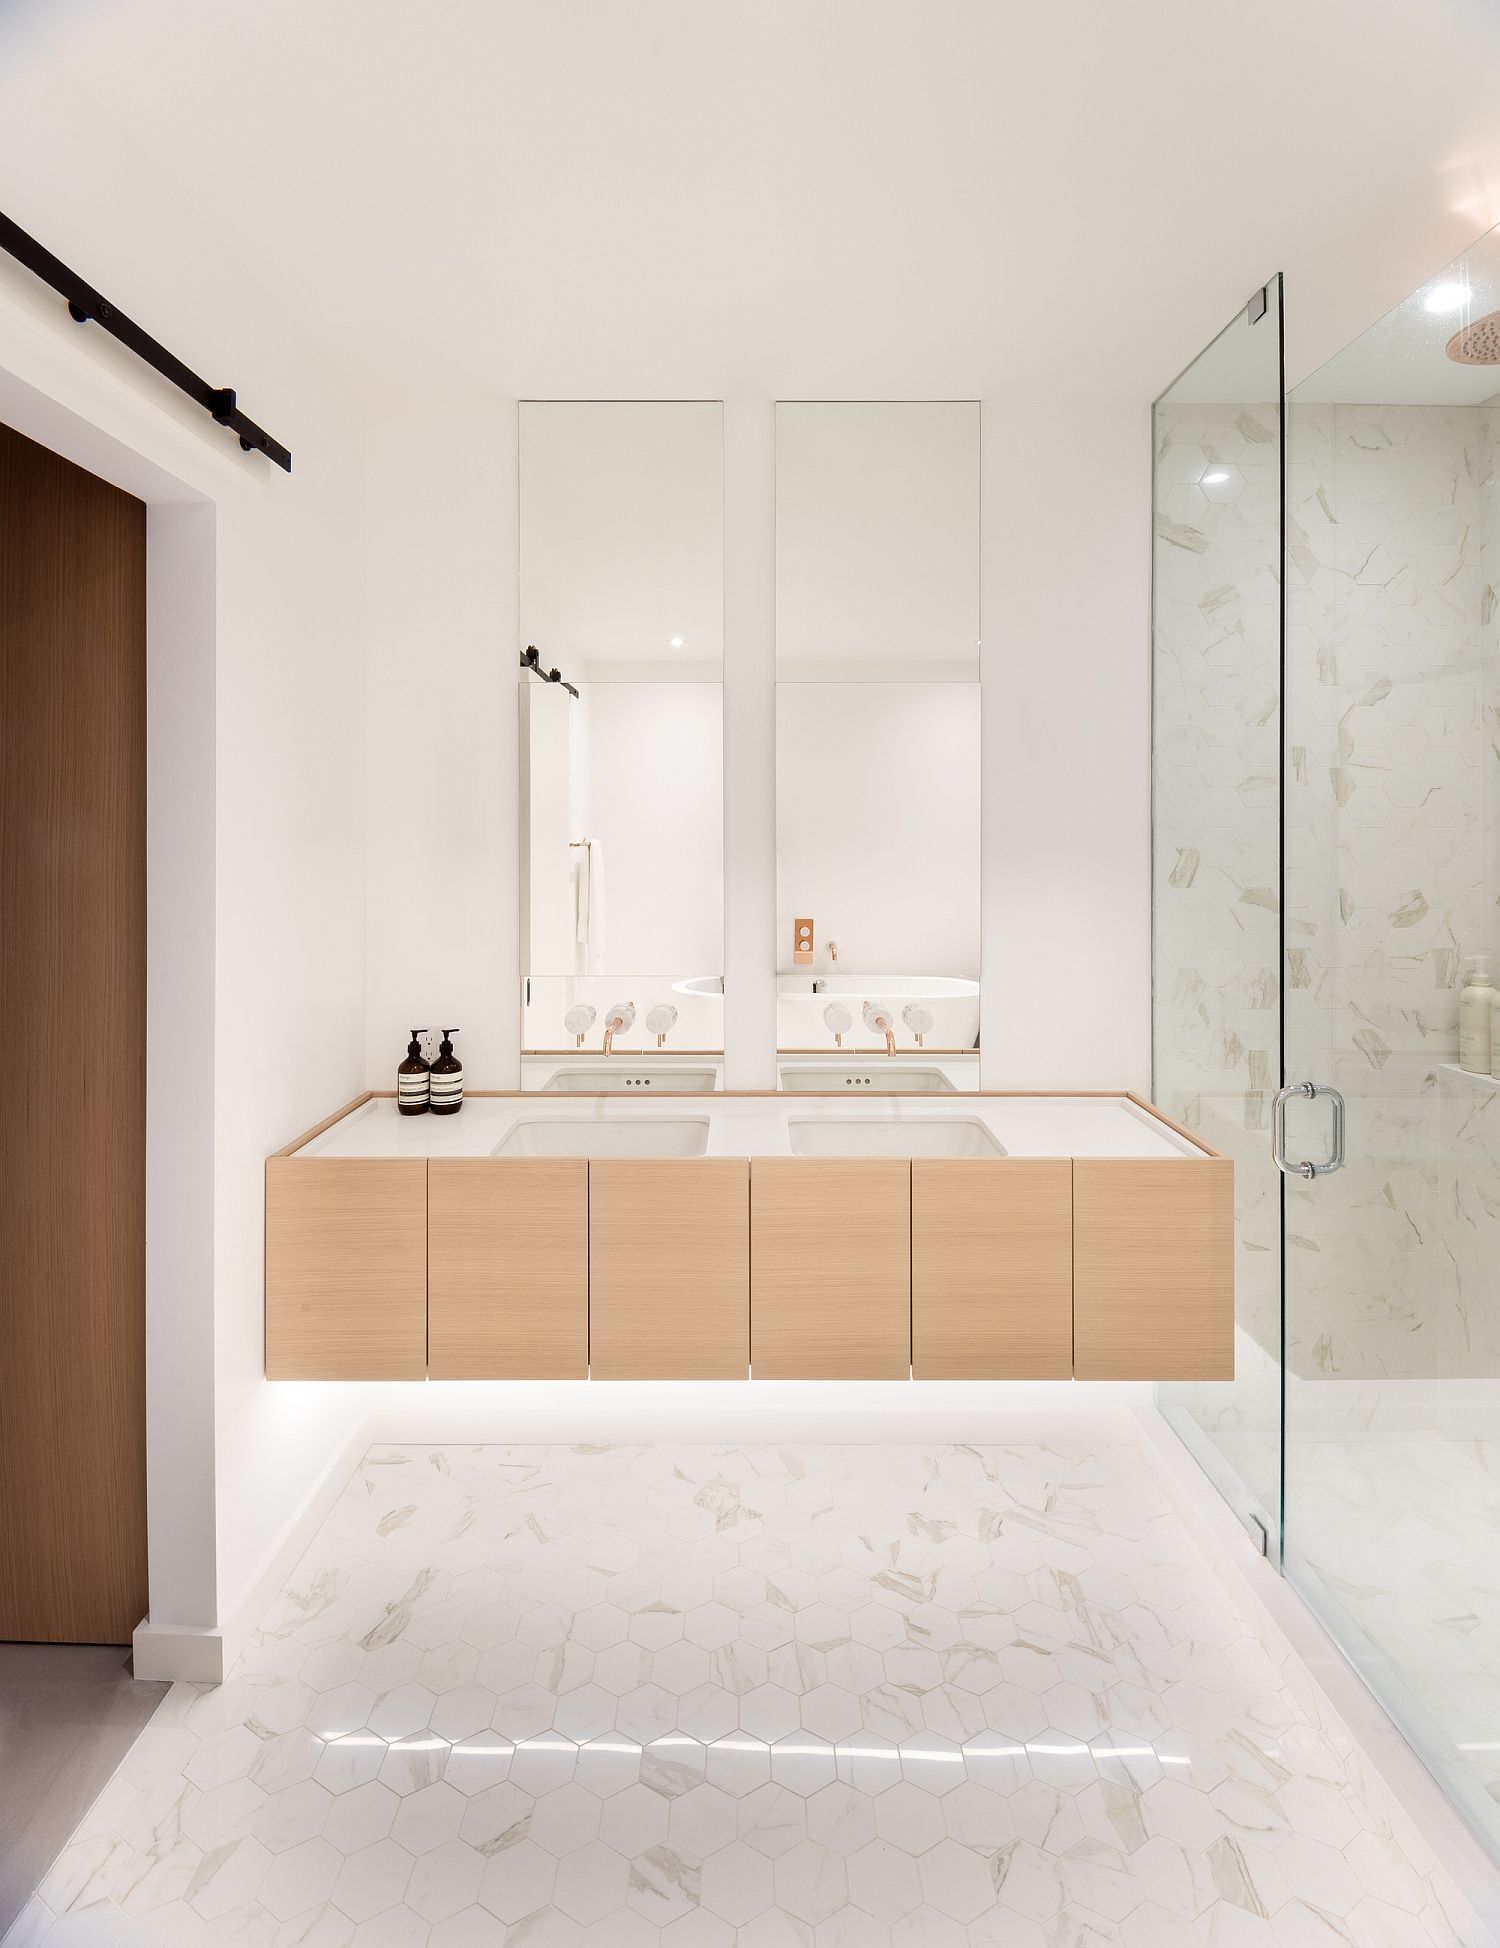 White-hexagonal-tiles-on-the-floor-add-subtle-pattern-to-the-curated-bathroom